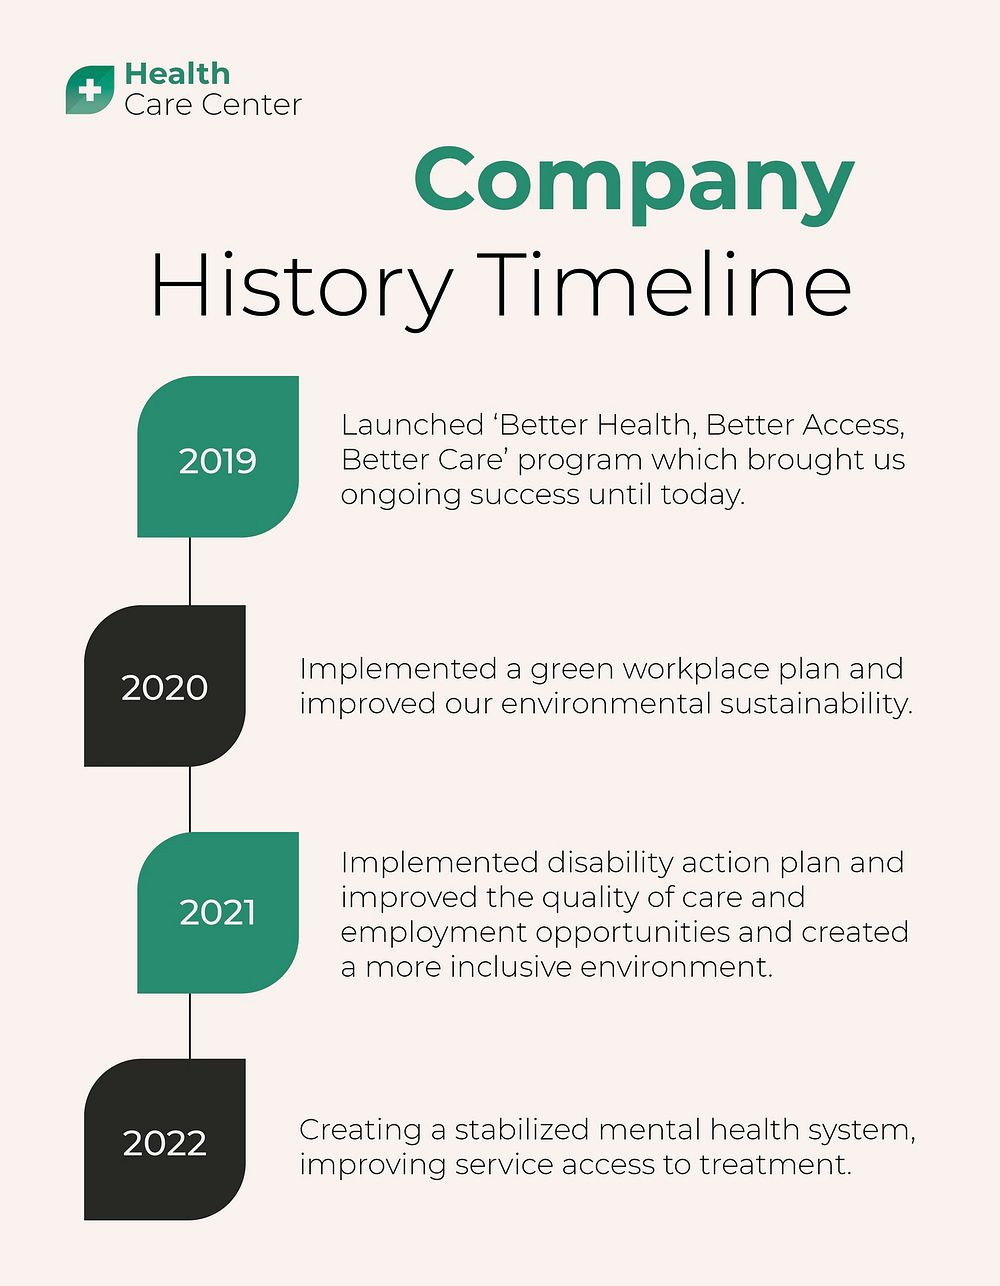 Company timeline infographic flyer template, medical business psd